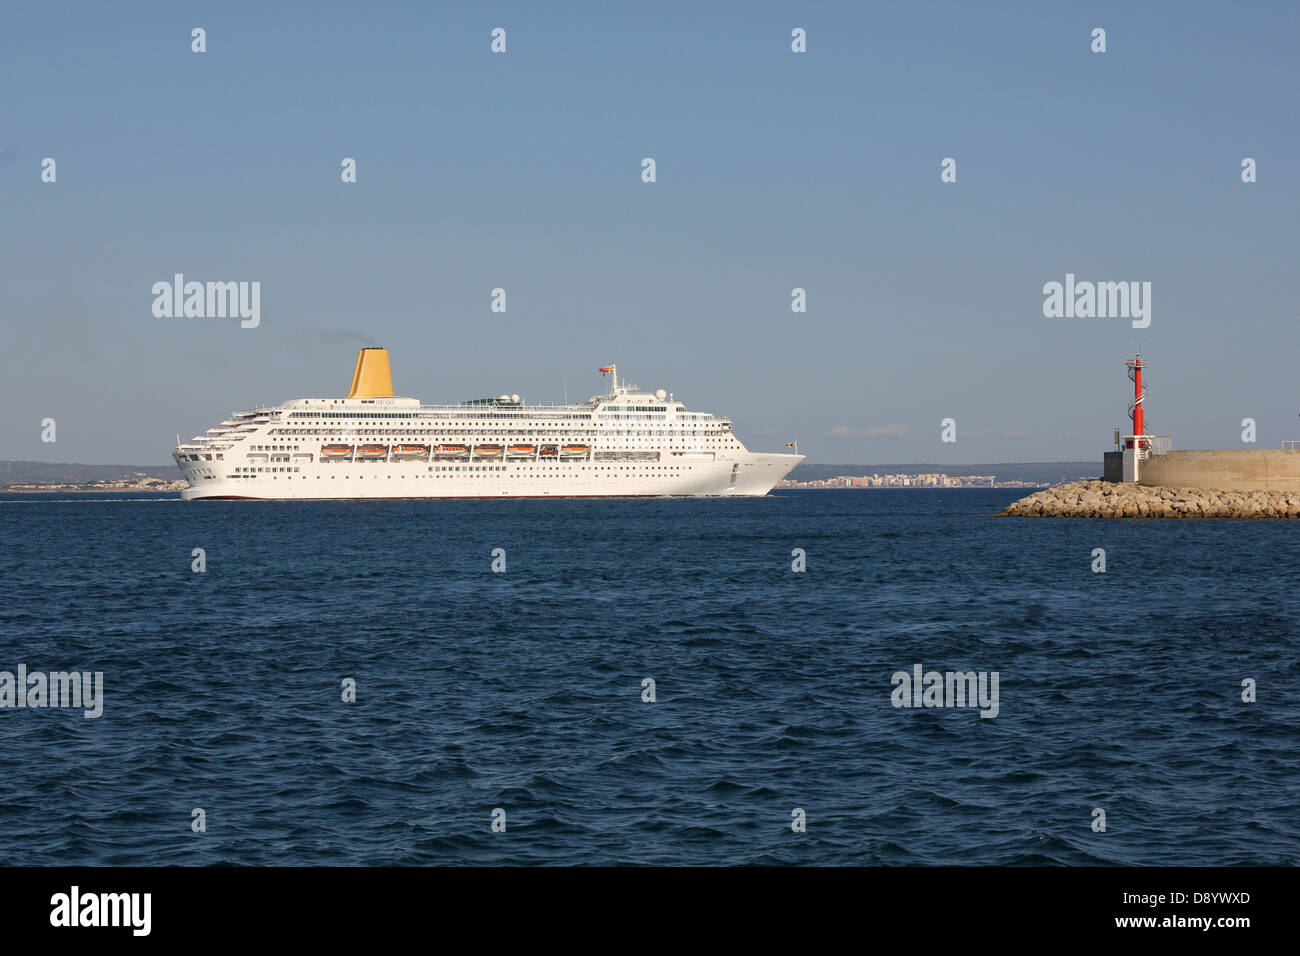 https://c8.alamy.com/comp/D8YWXD/po-p-and-o-cruise-line-cruise-ship-oriana-260-mtrs-leaving-port-at-D8YWXD.jpg